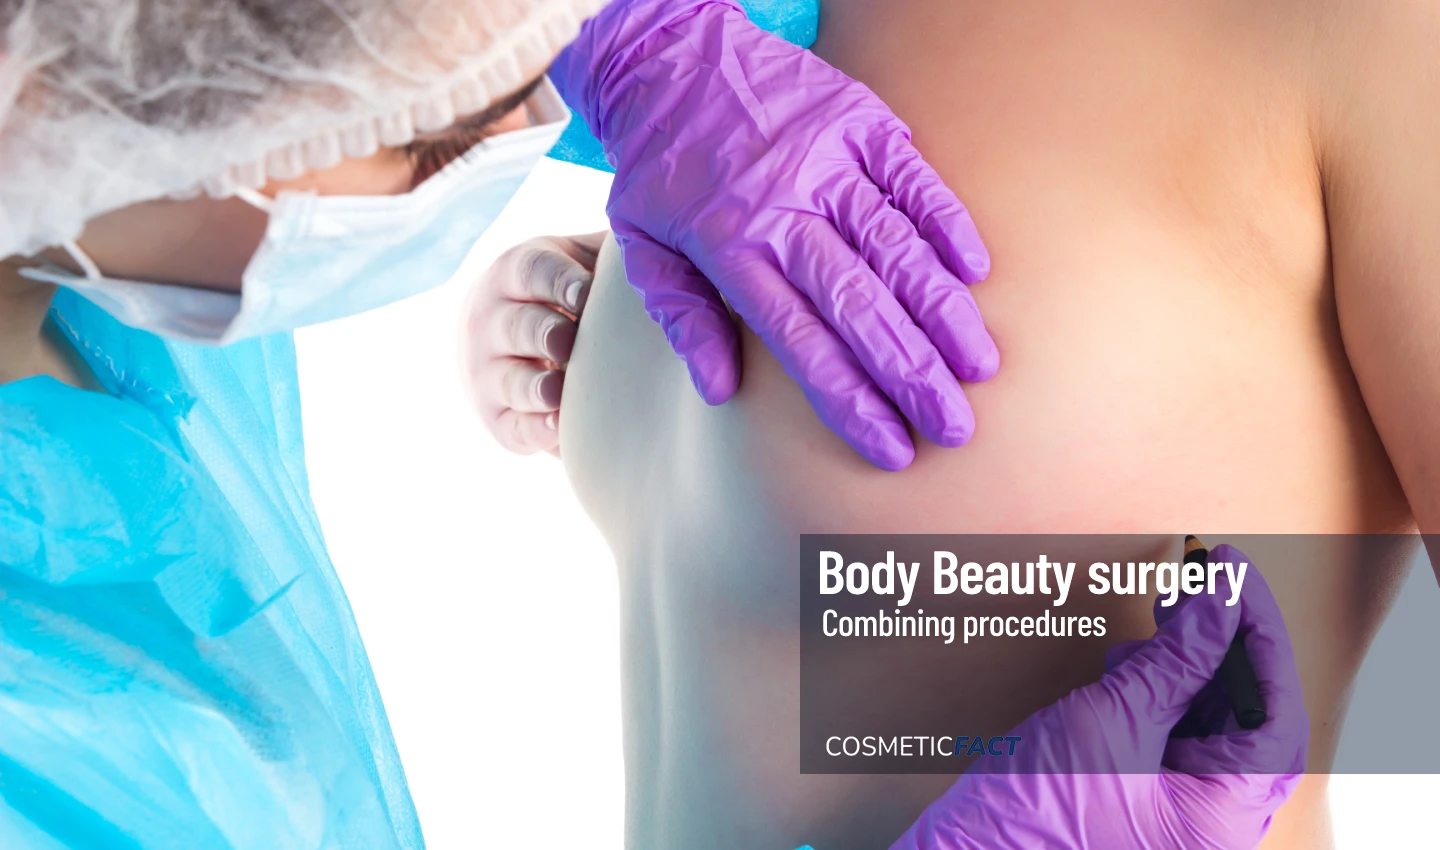 An image of a doctor examining a patient's breasts as part of the preparation for body cosmetic surgery with breast procedures, emphasizing the importance of managing expectations and understanding potential outcomes and risks.